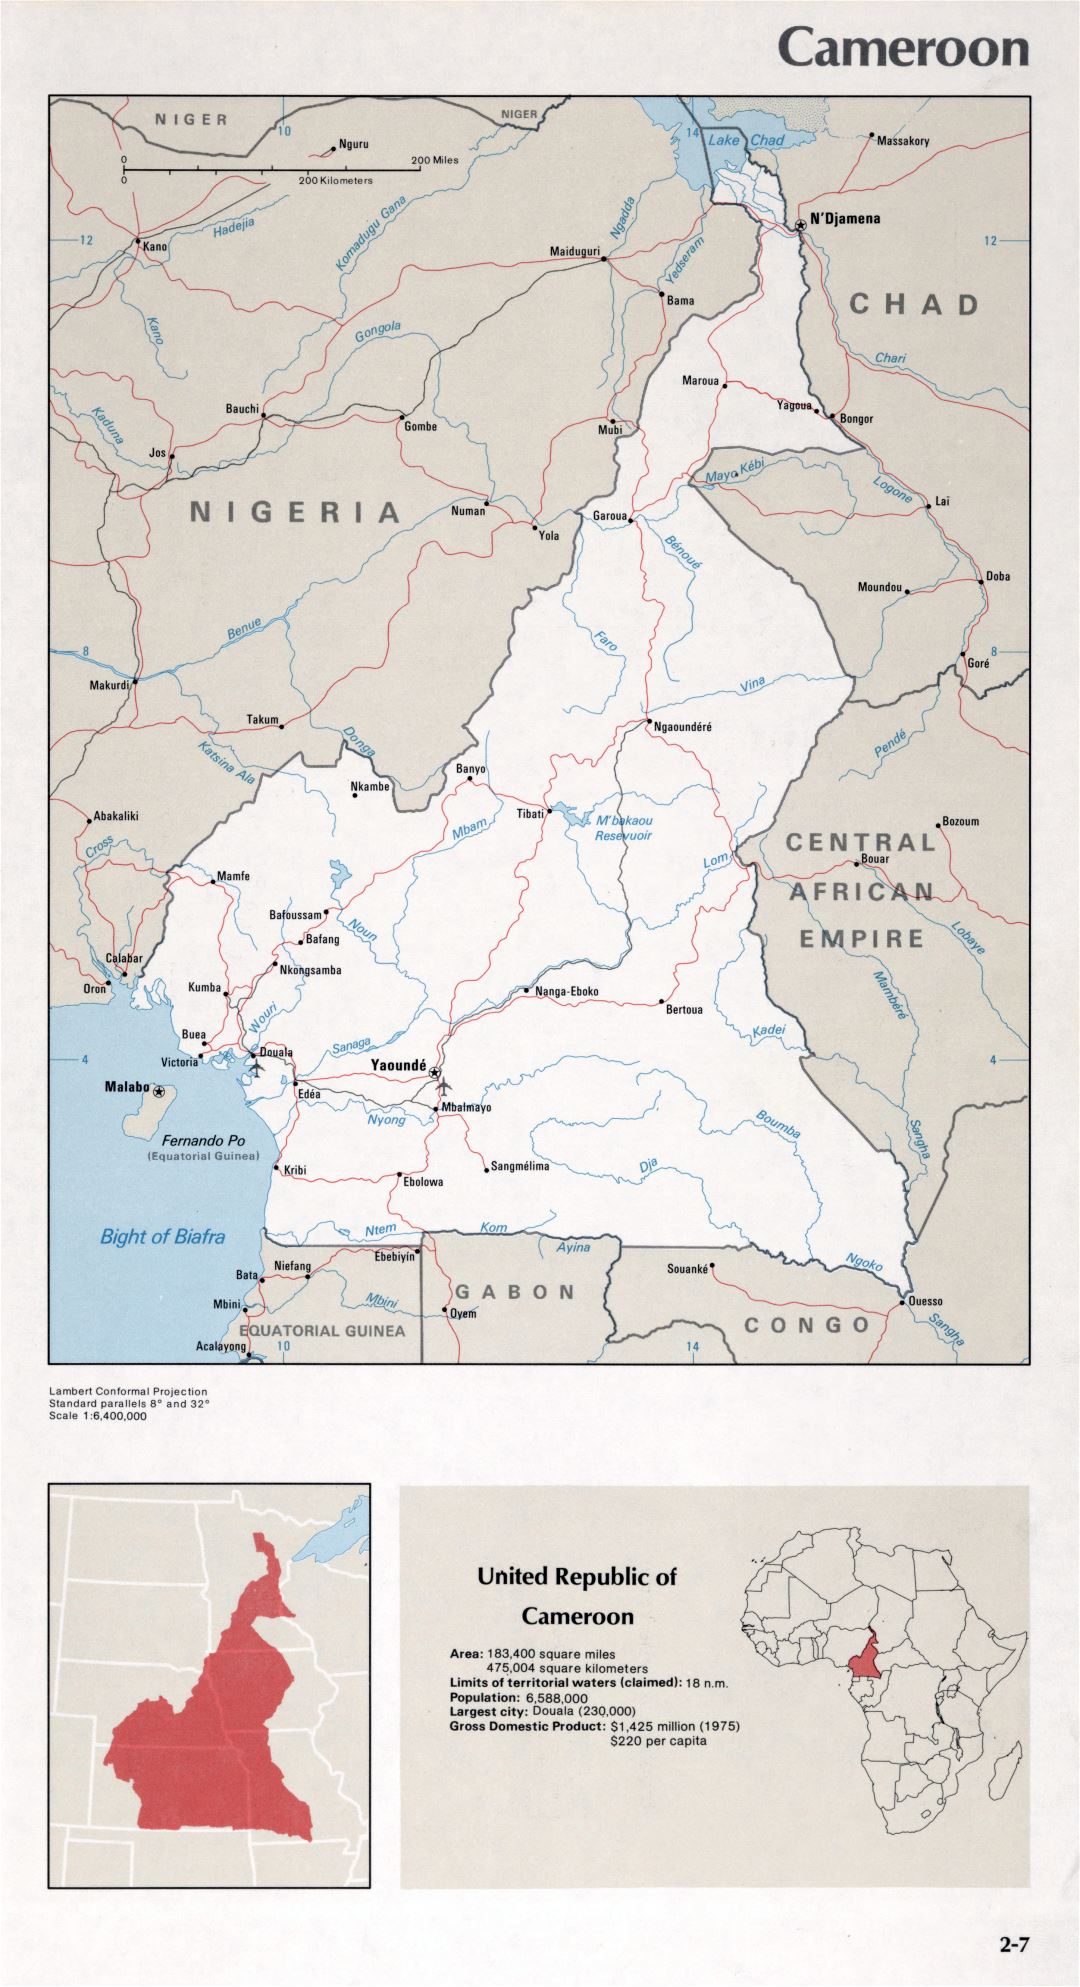 Map of Cameroon (2-7)